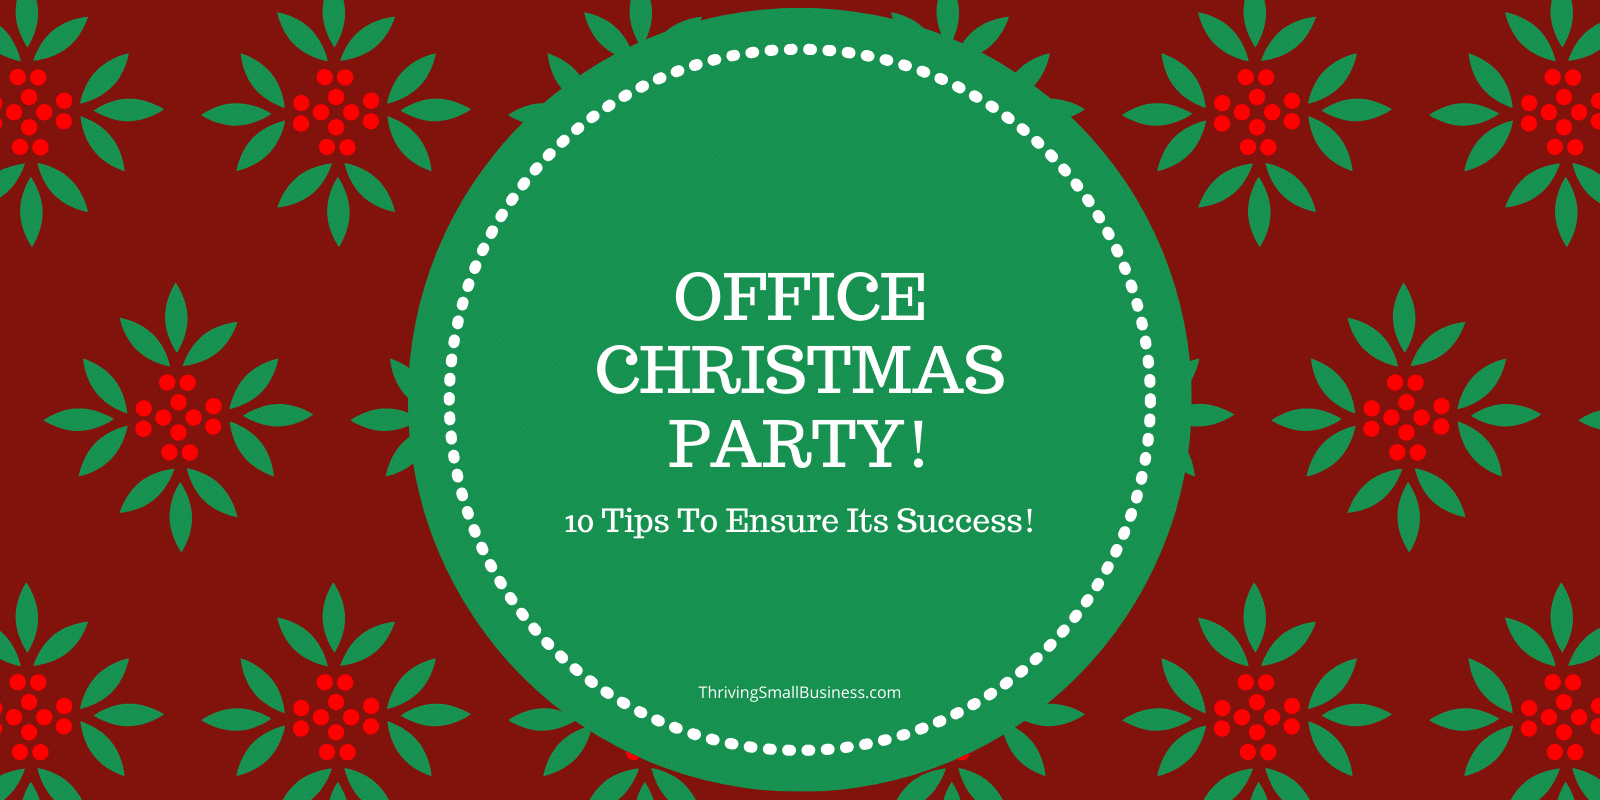 Office Christmas Party 10 Tips To Help Make It A Success The Thriving Small Business